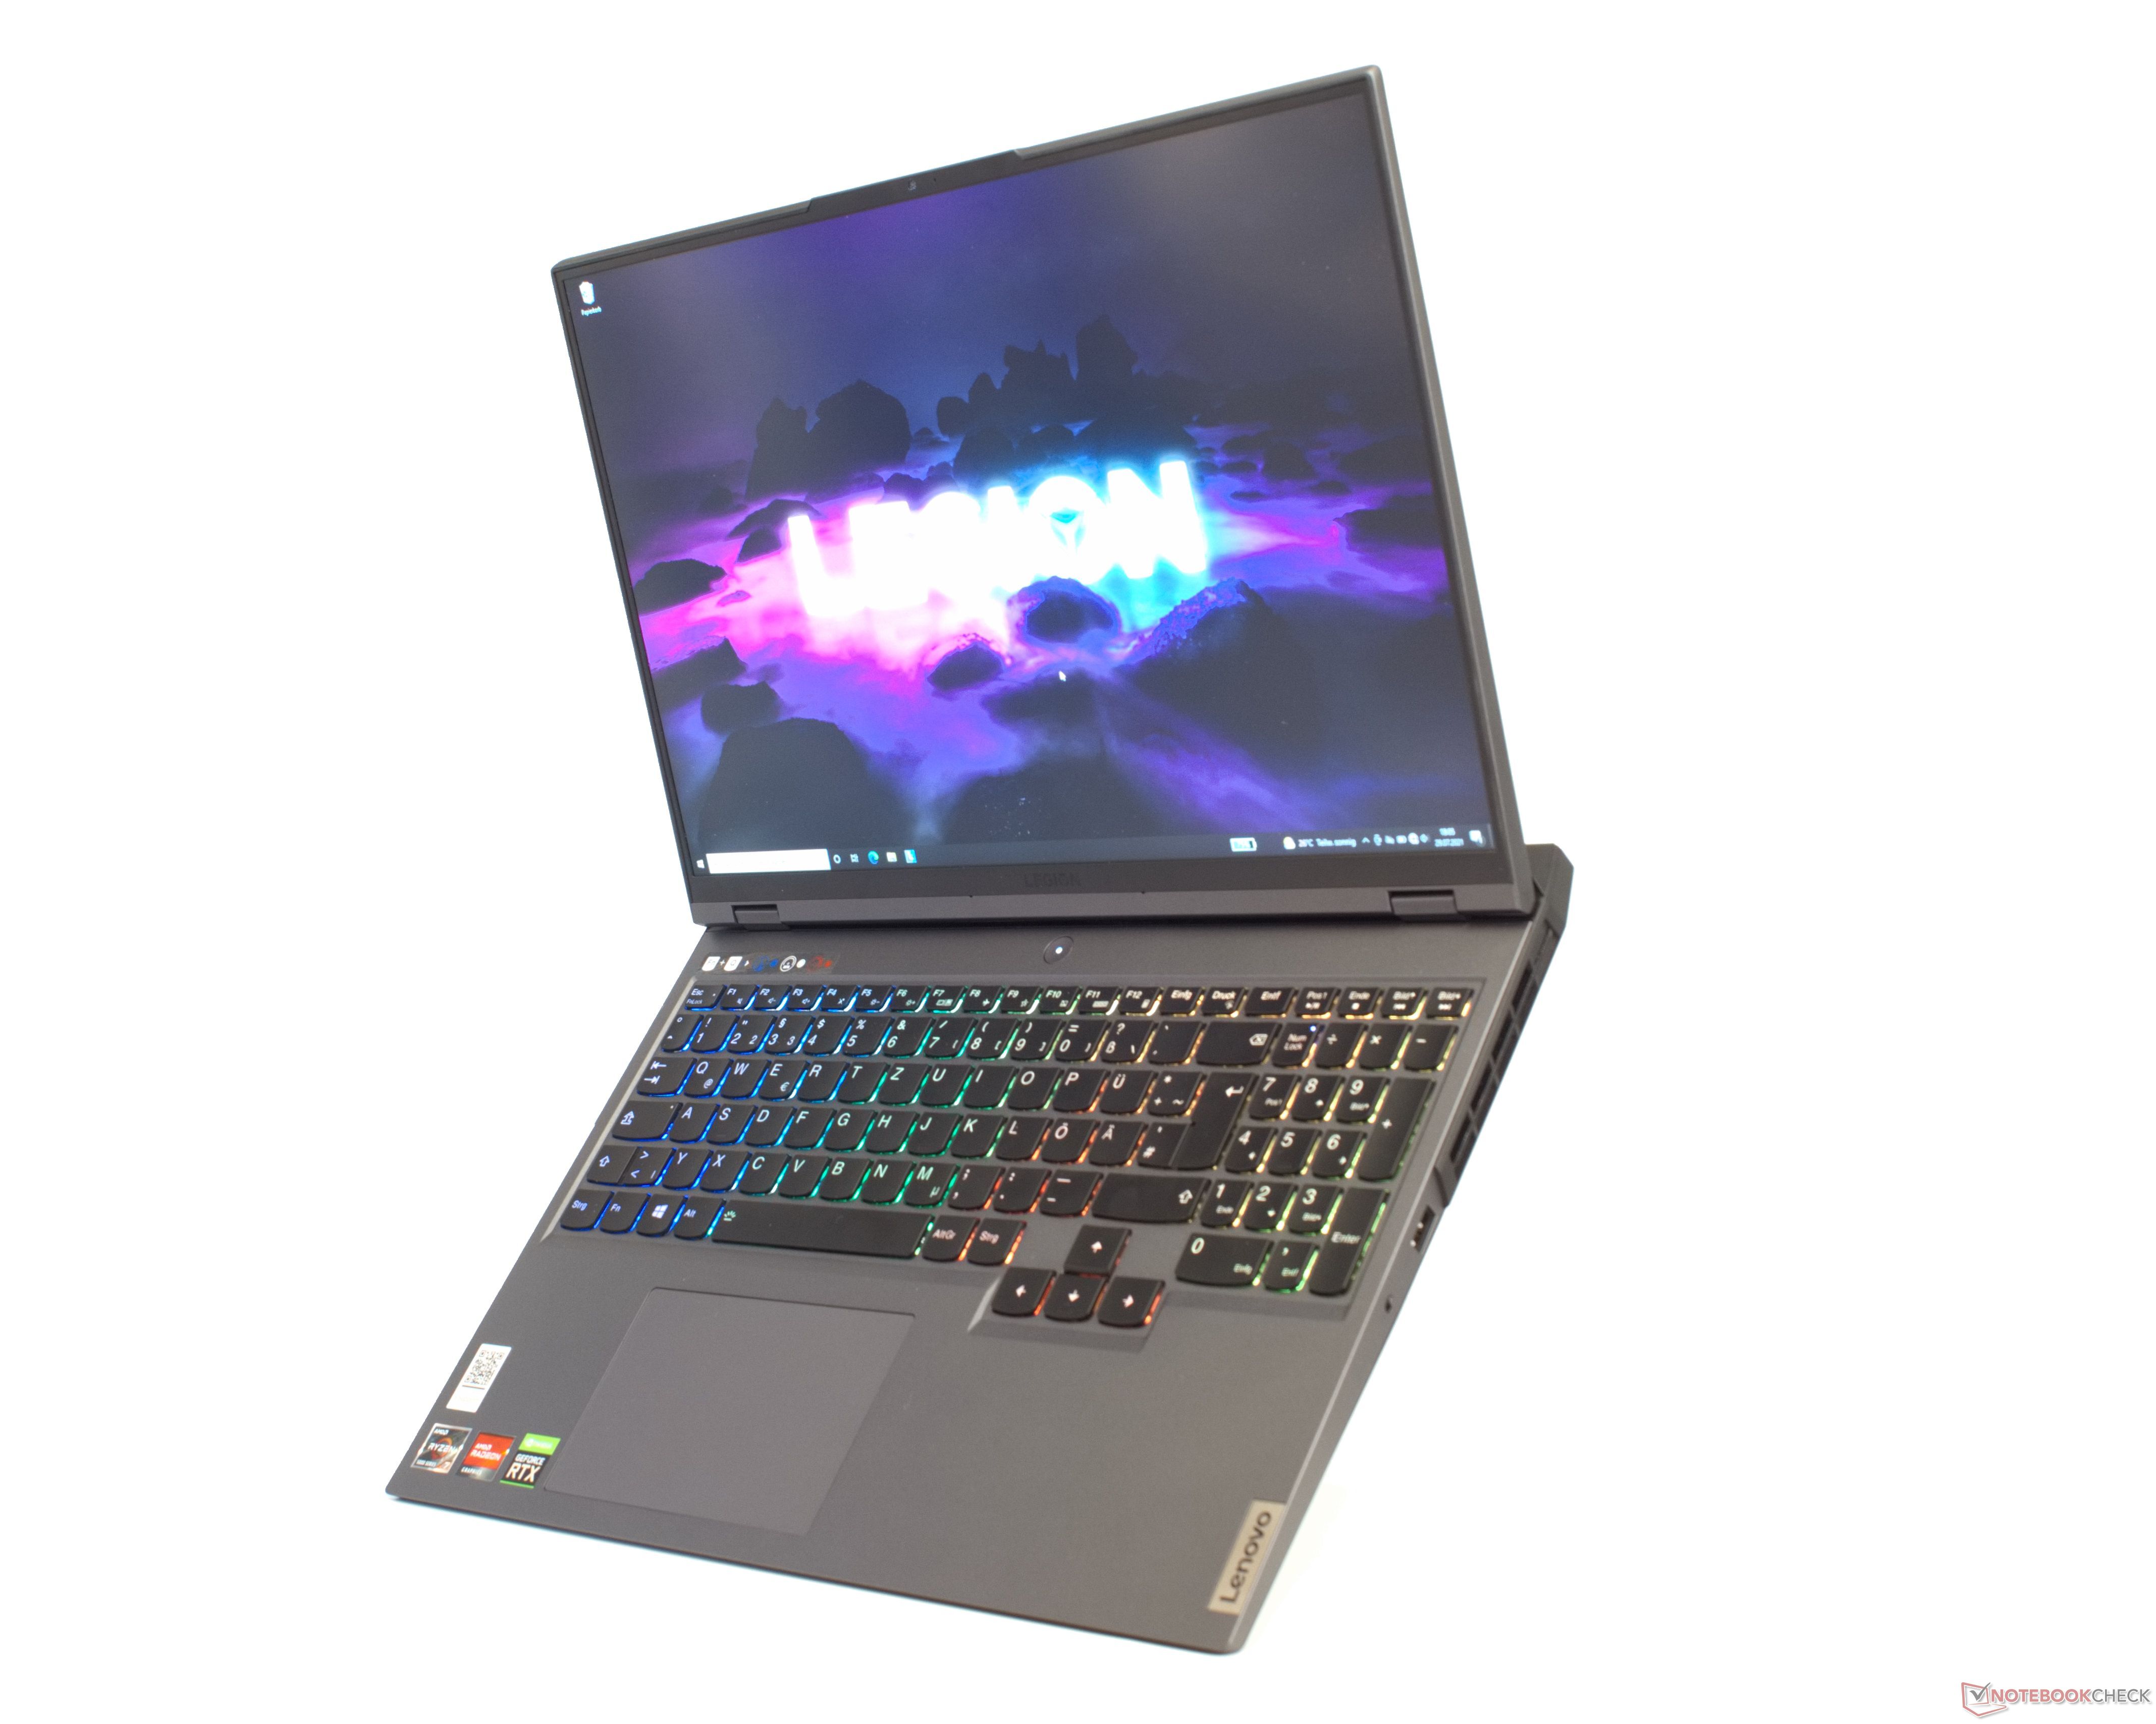 Lenovo Legion 5 Pro 16 review: A gaming laptop with a bright 165-Hz display